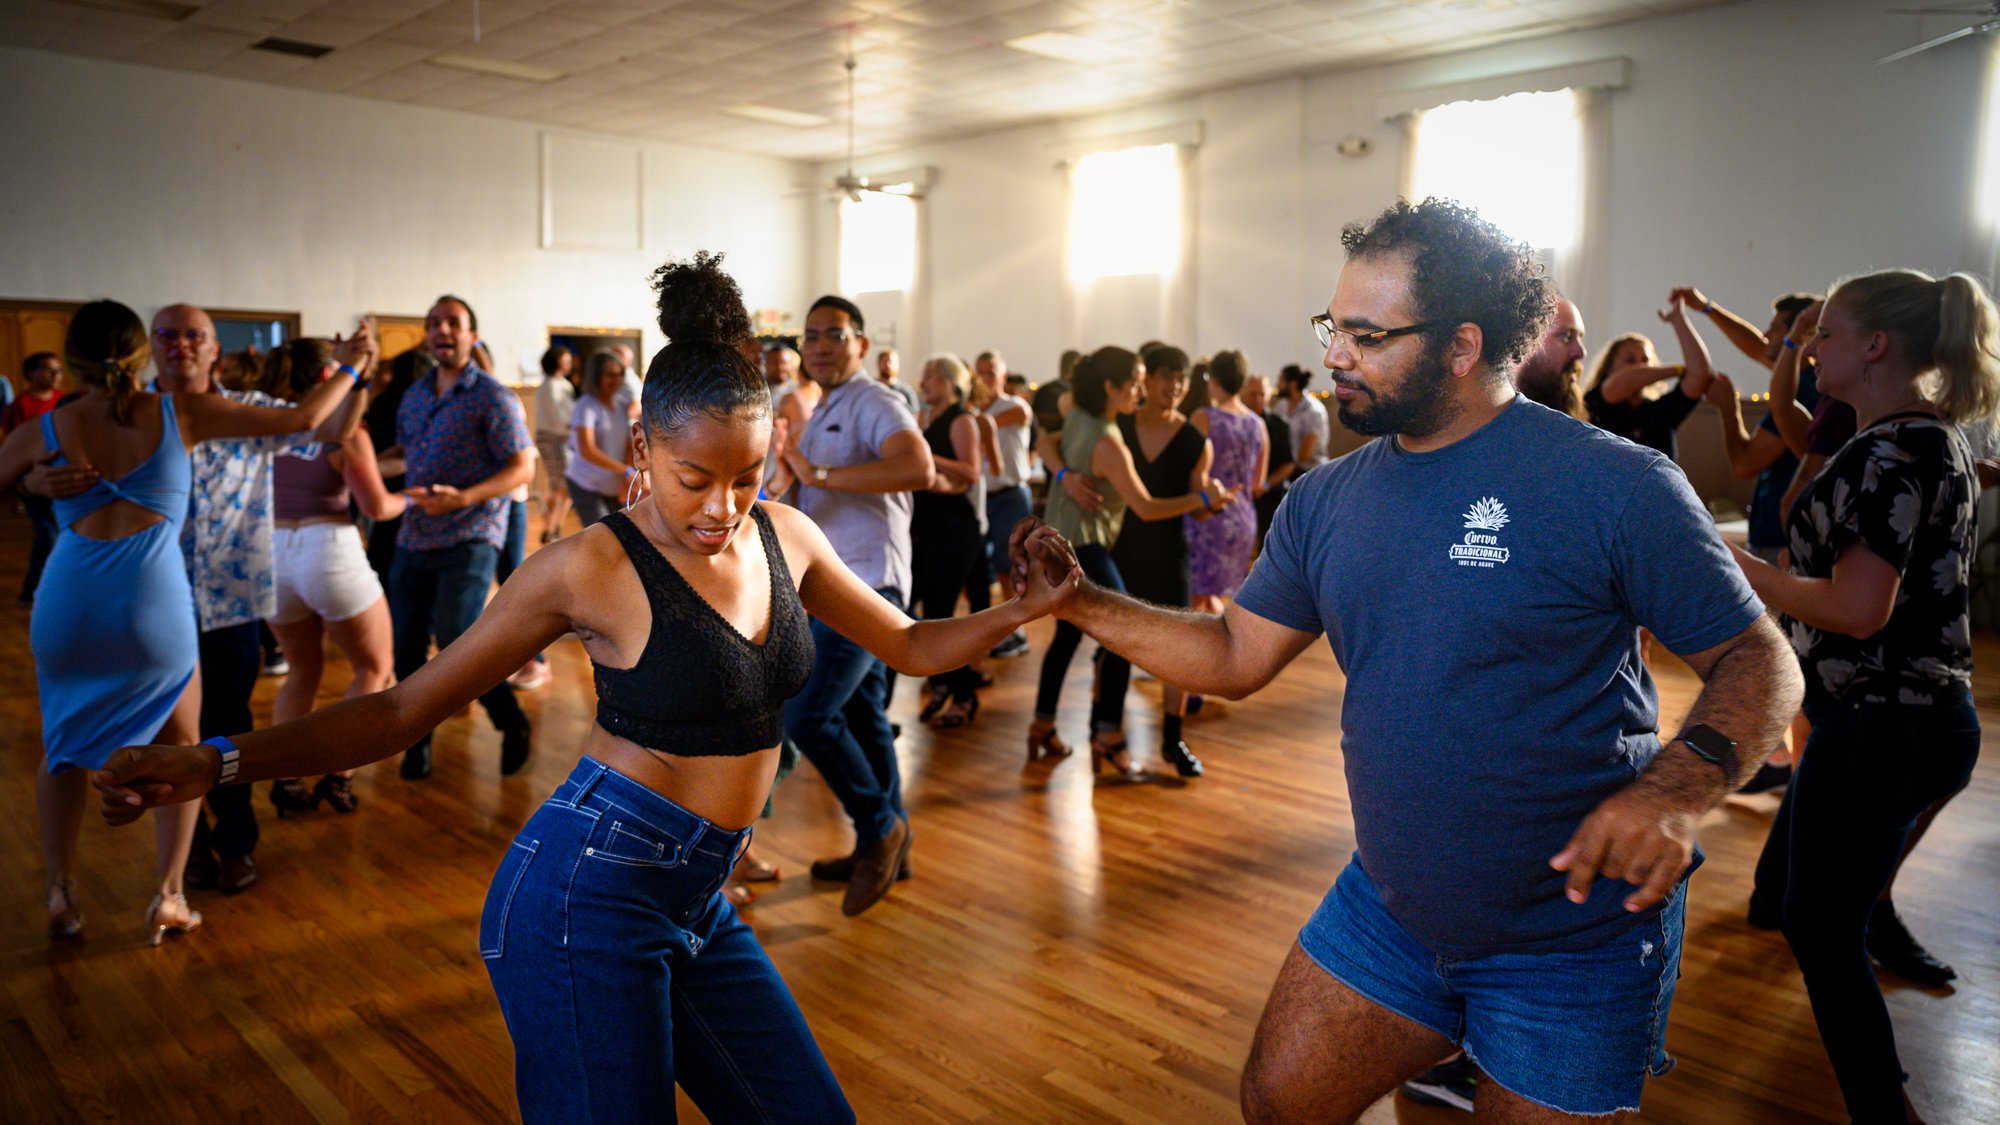  We support the growth of salsa dancing in West Michigan and provide venues where salsa dancers of all levels and styles can grow and thrive. 